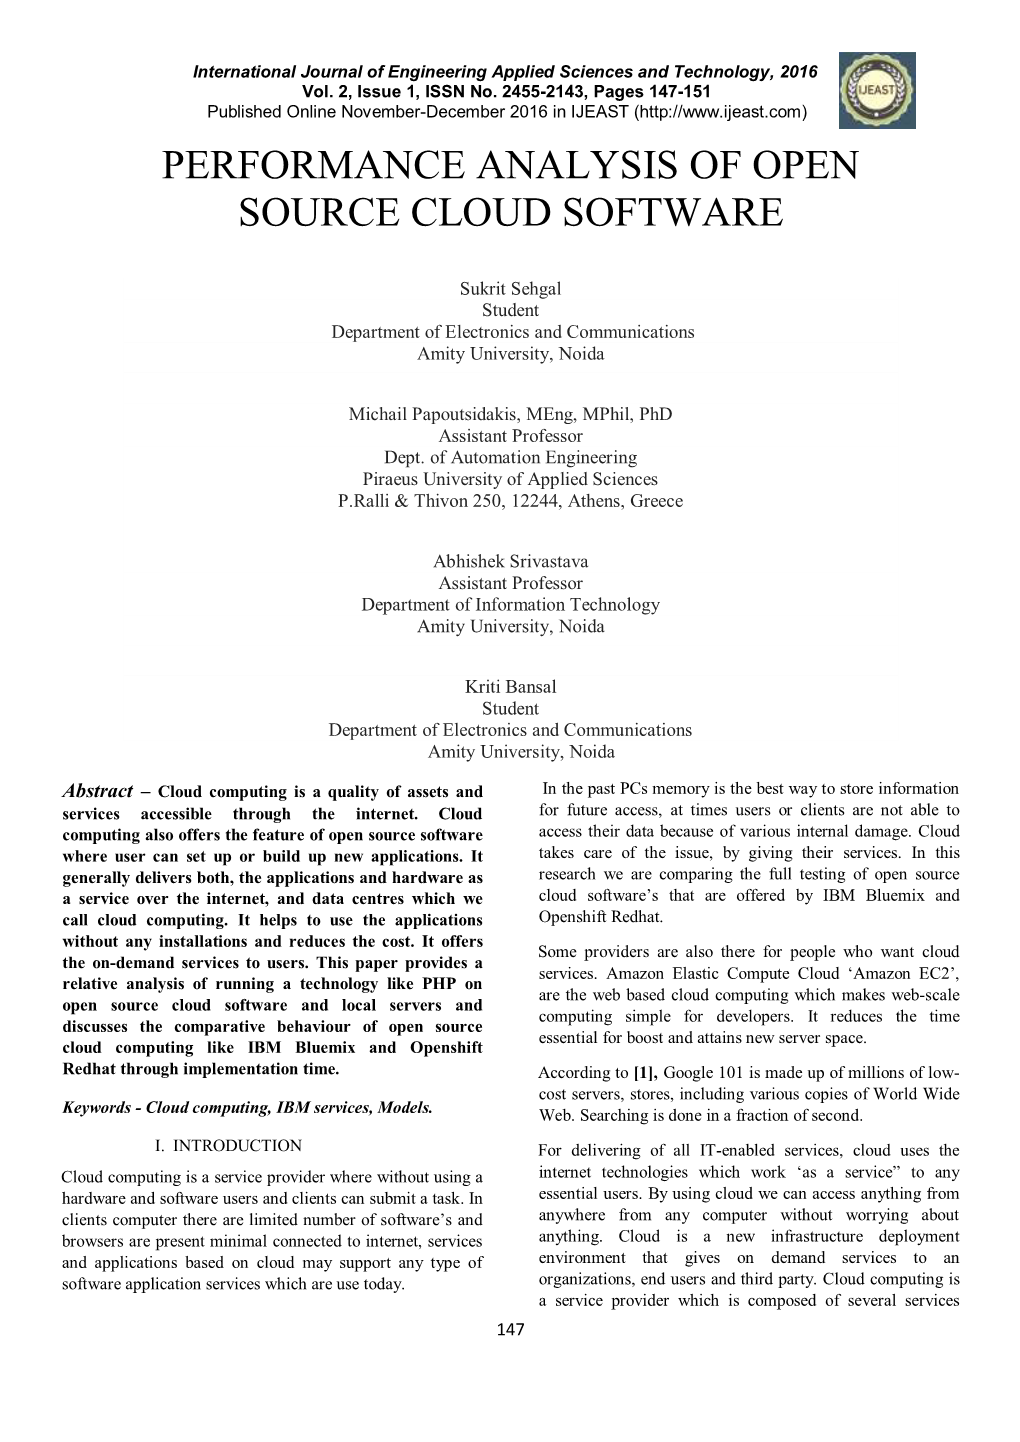 Performance Analysis of Open Source Cloud Software